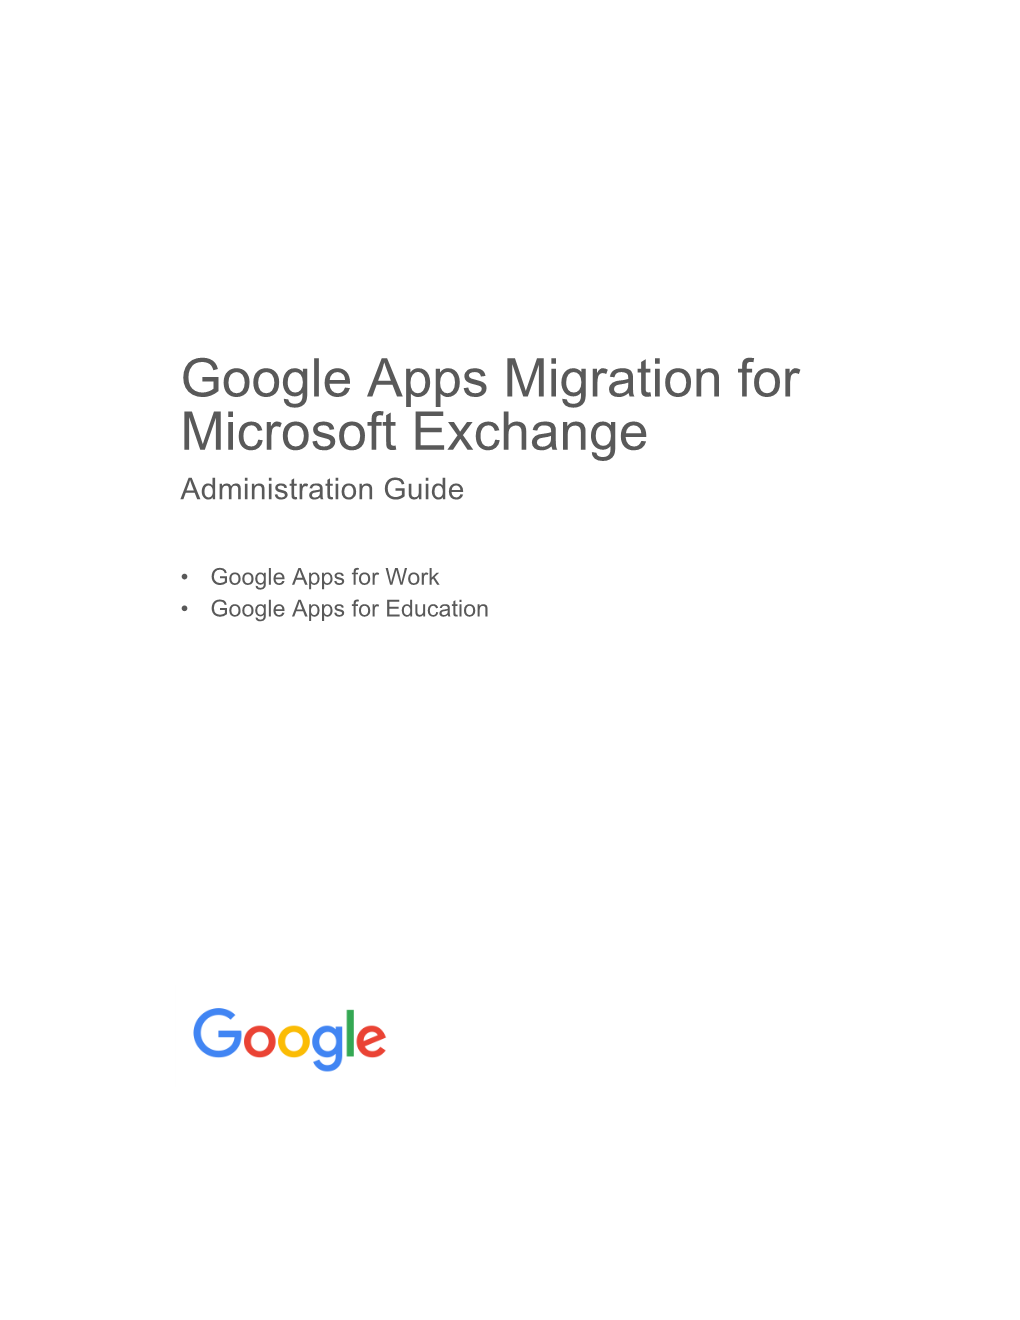 Google Apps Migration for Microsoft Exchange Administration Guide